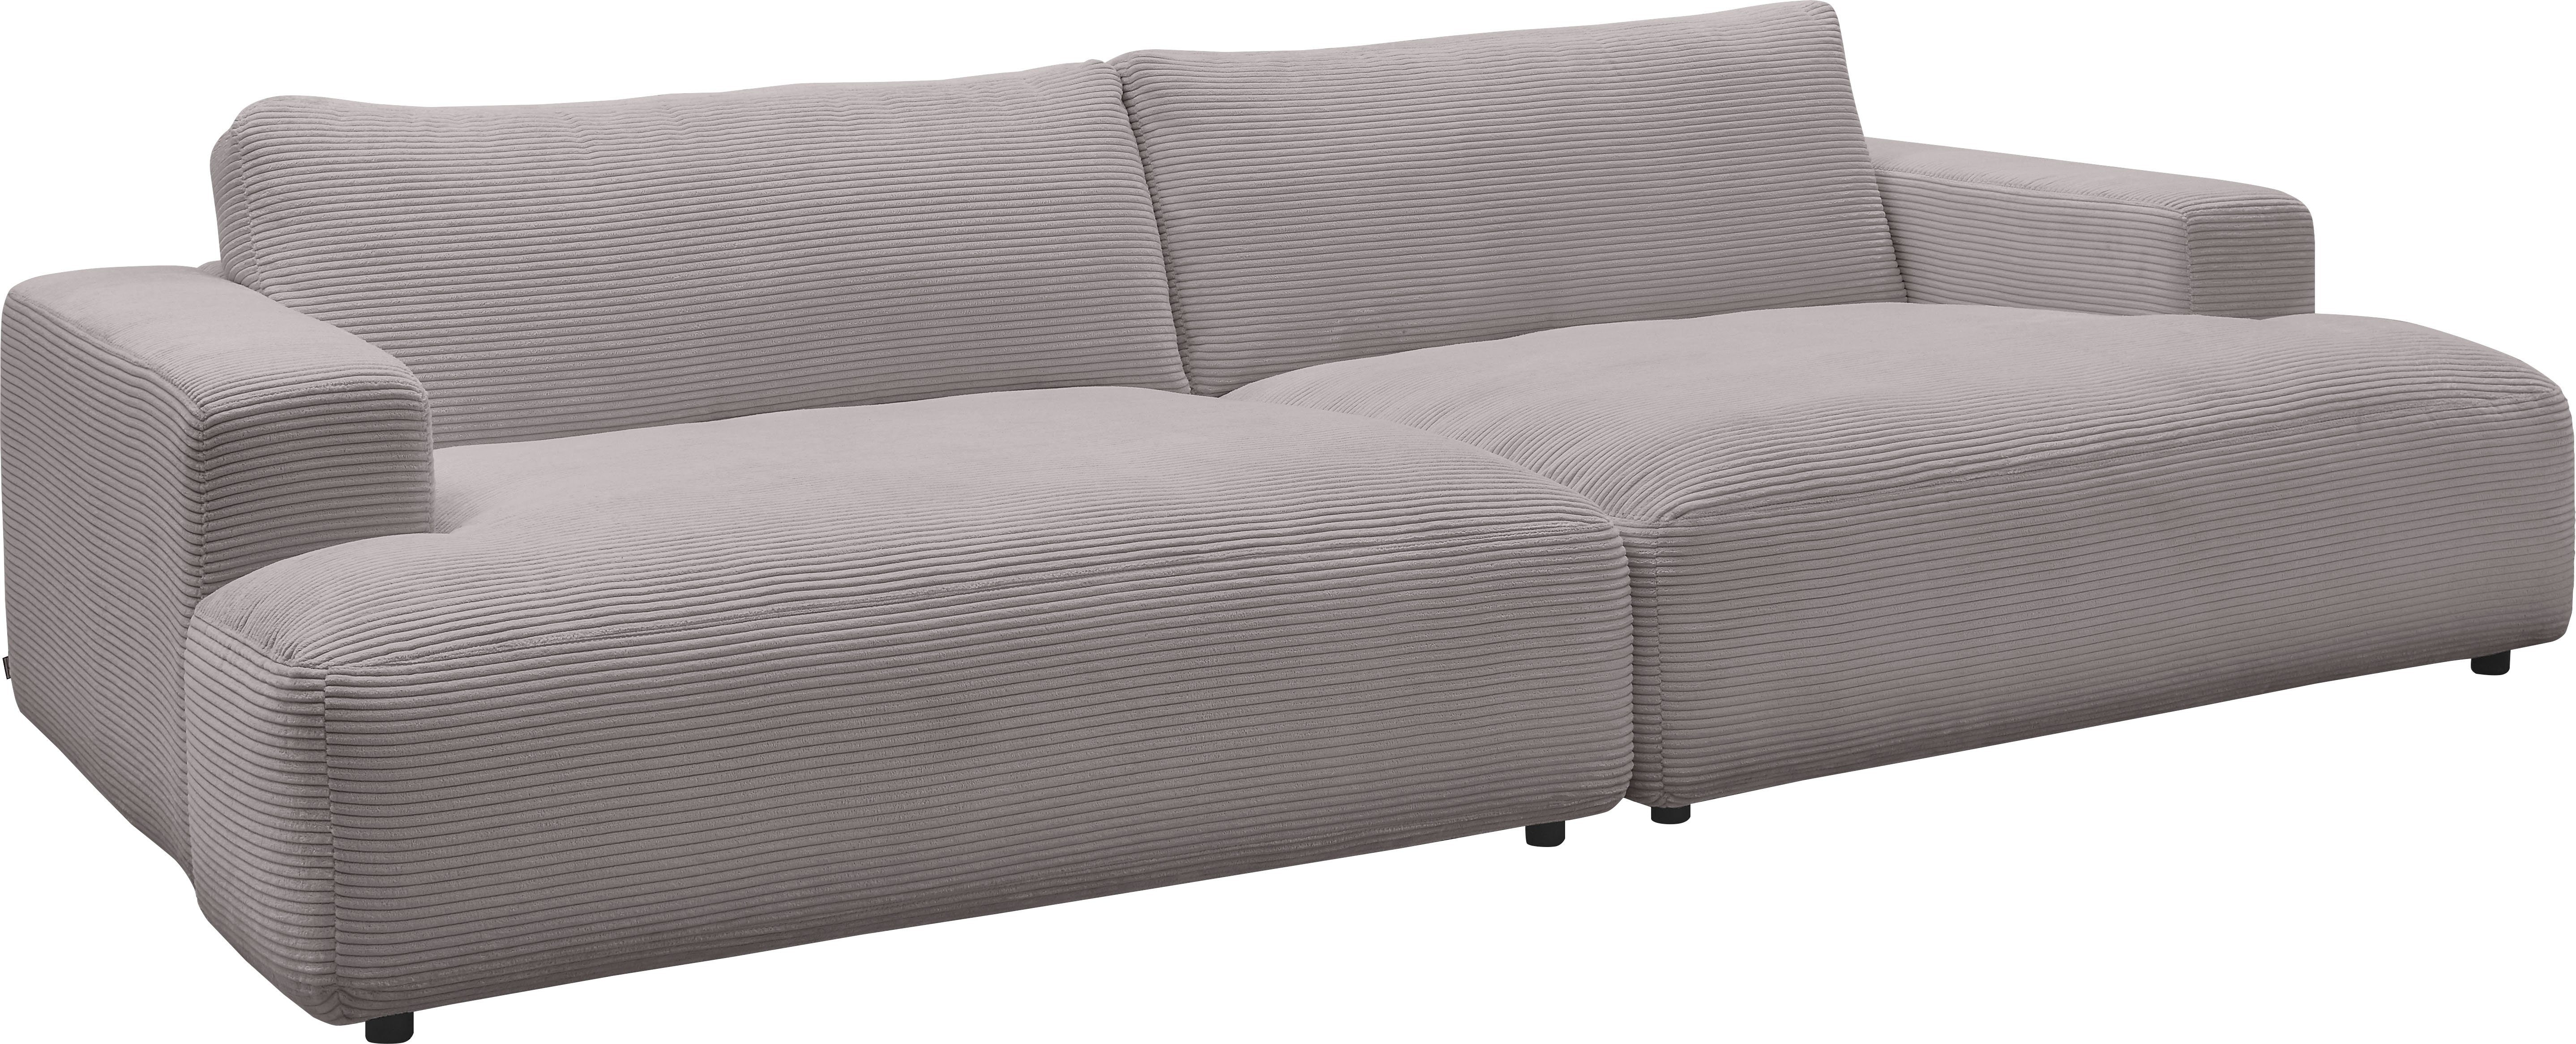 grey by branded Loungesofa cm Lucia, 292 GALLERY Cord-Bezug, Breite Musterring M